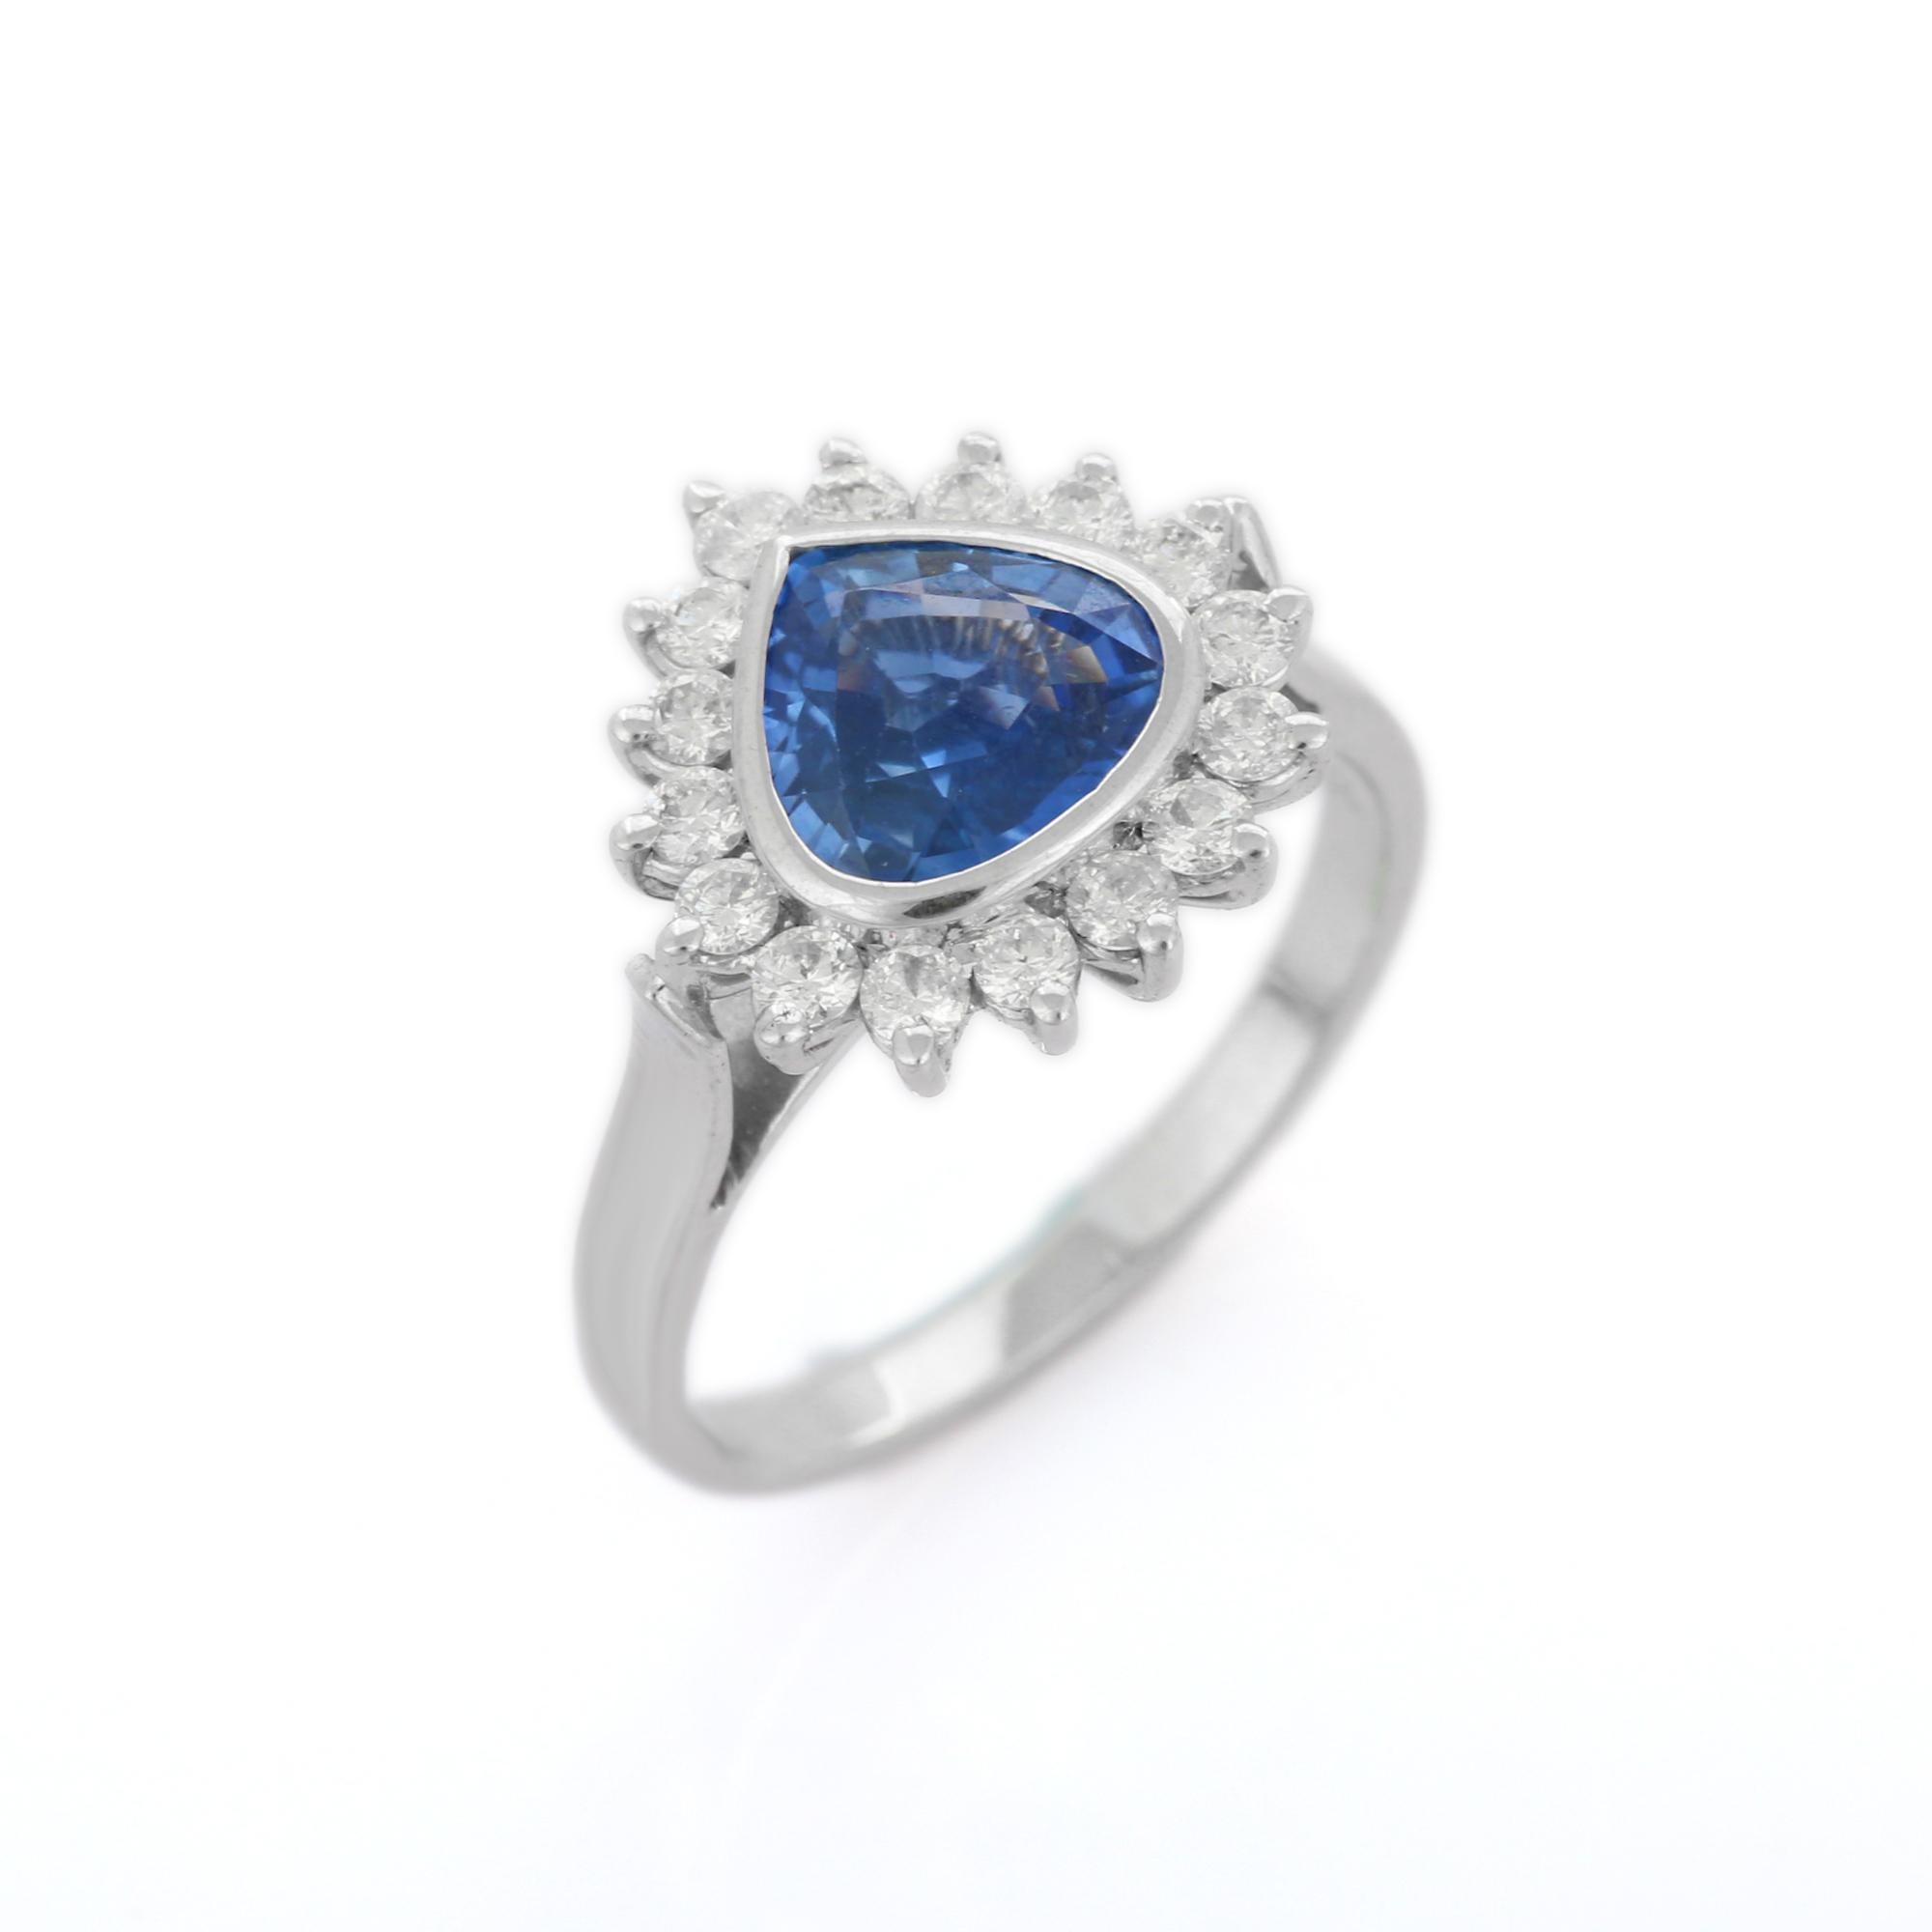 For Sale:  2.05 ct Blue Sapphire and Diamond Halo Engagement Ring in 18K White Gold 7